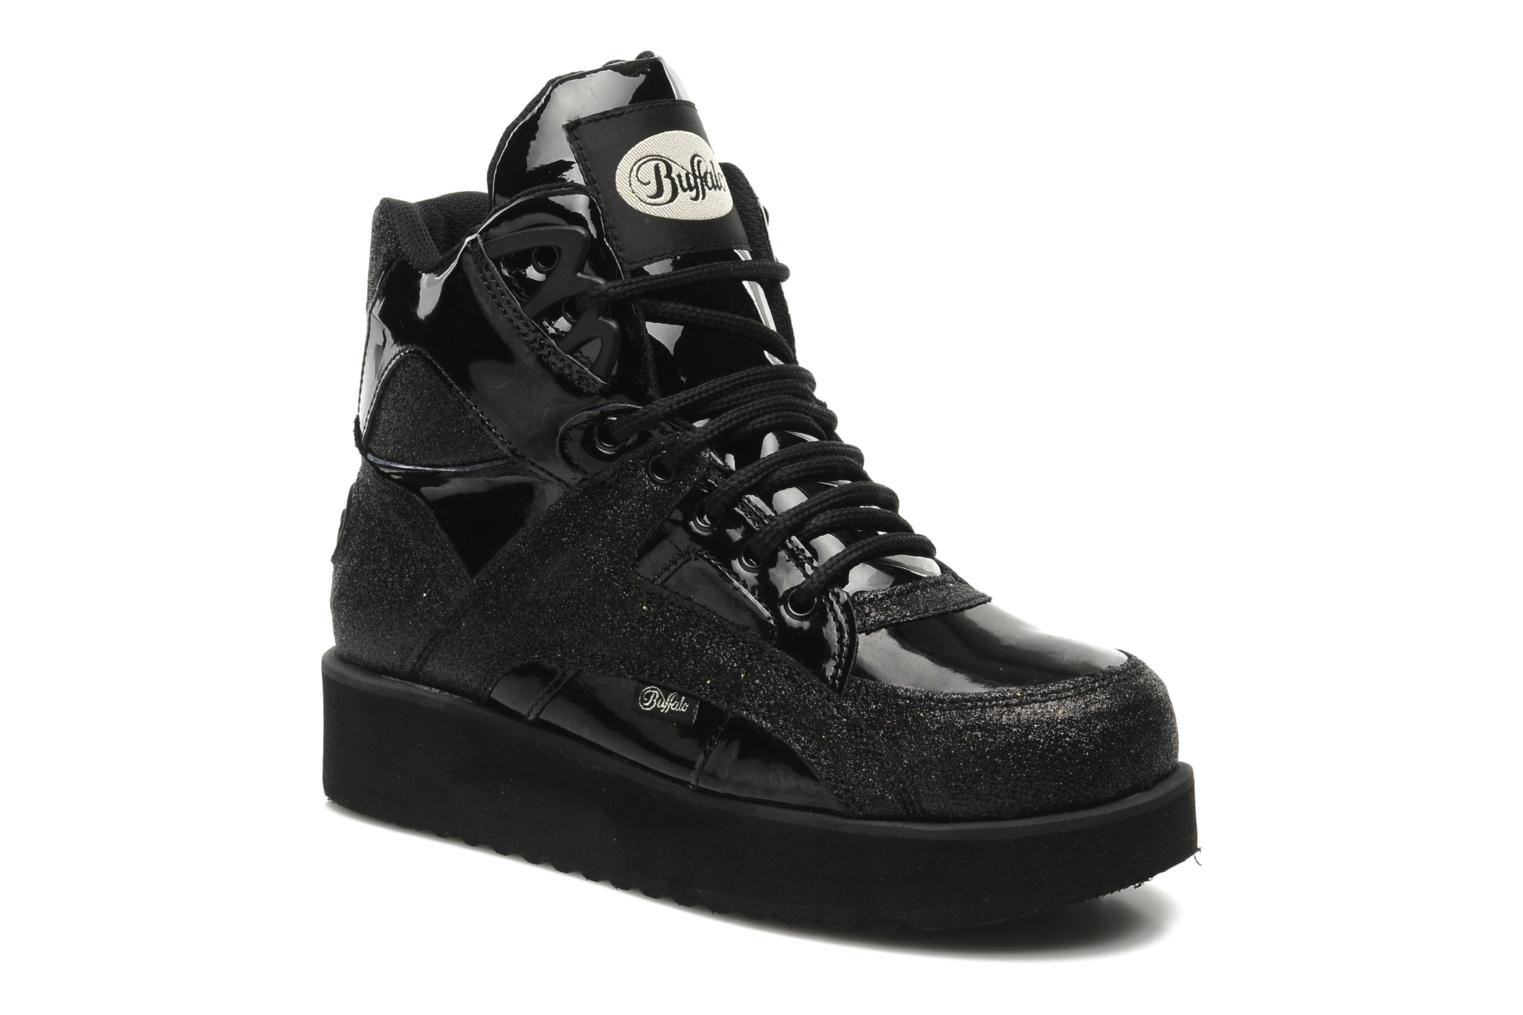 Buffalo Wisconsin Trainers in Black at Sarenza.co.uk (136494)